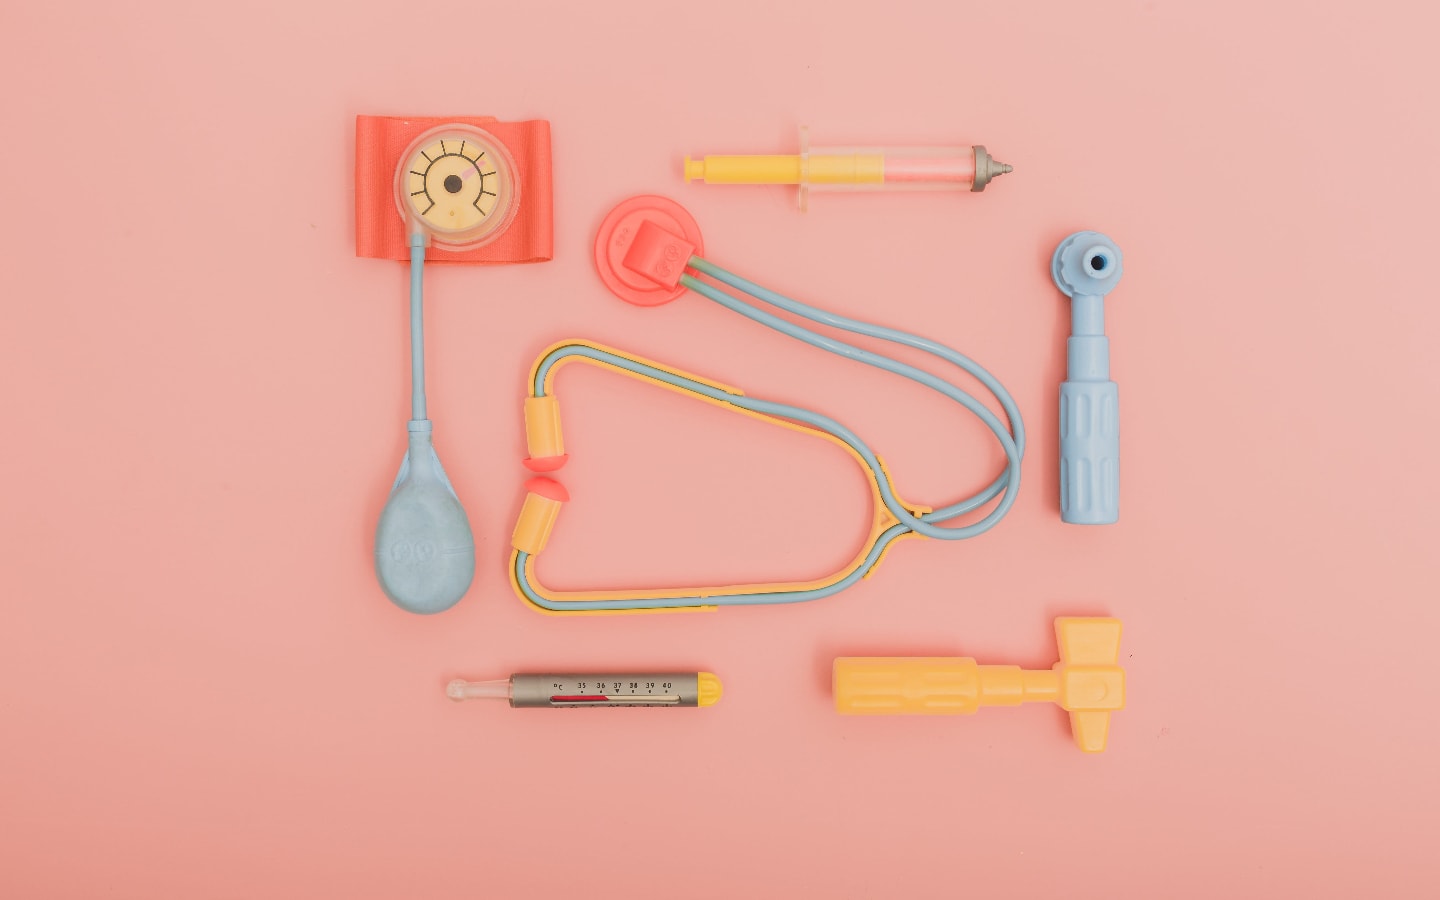 Knolling with toys